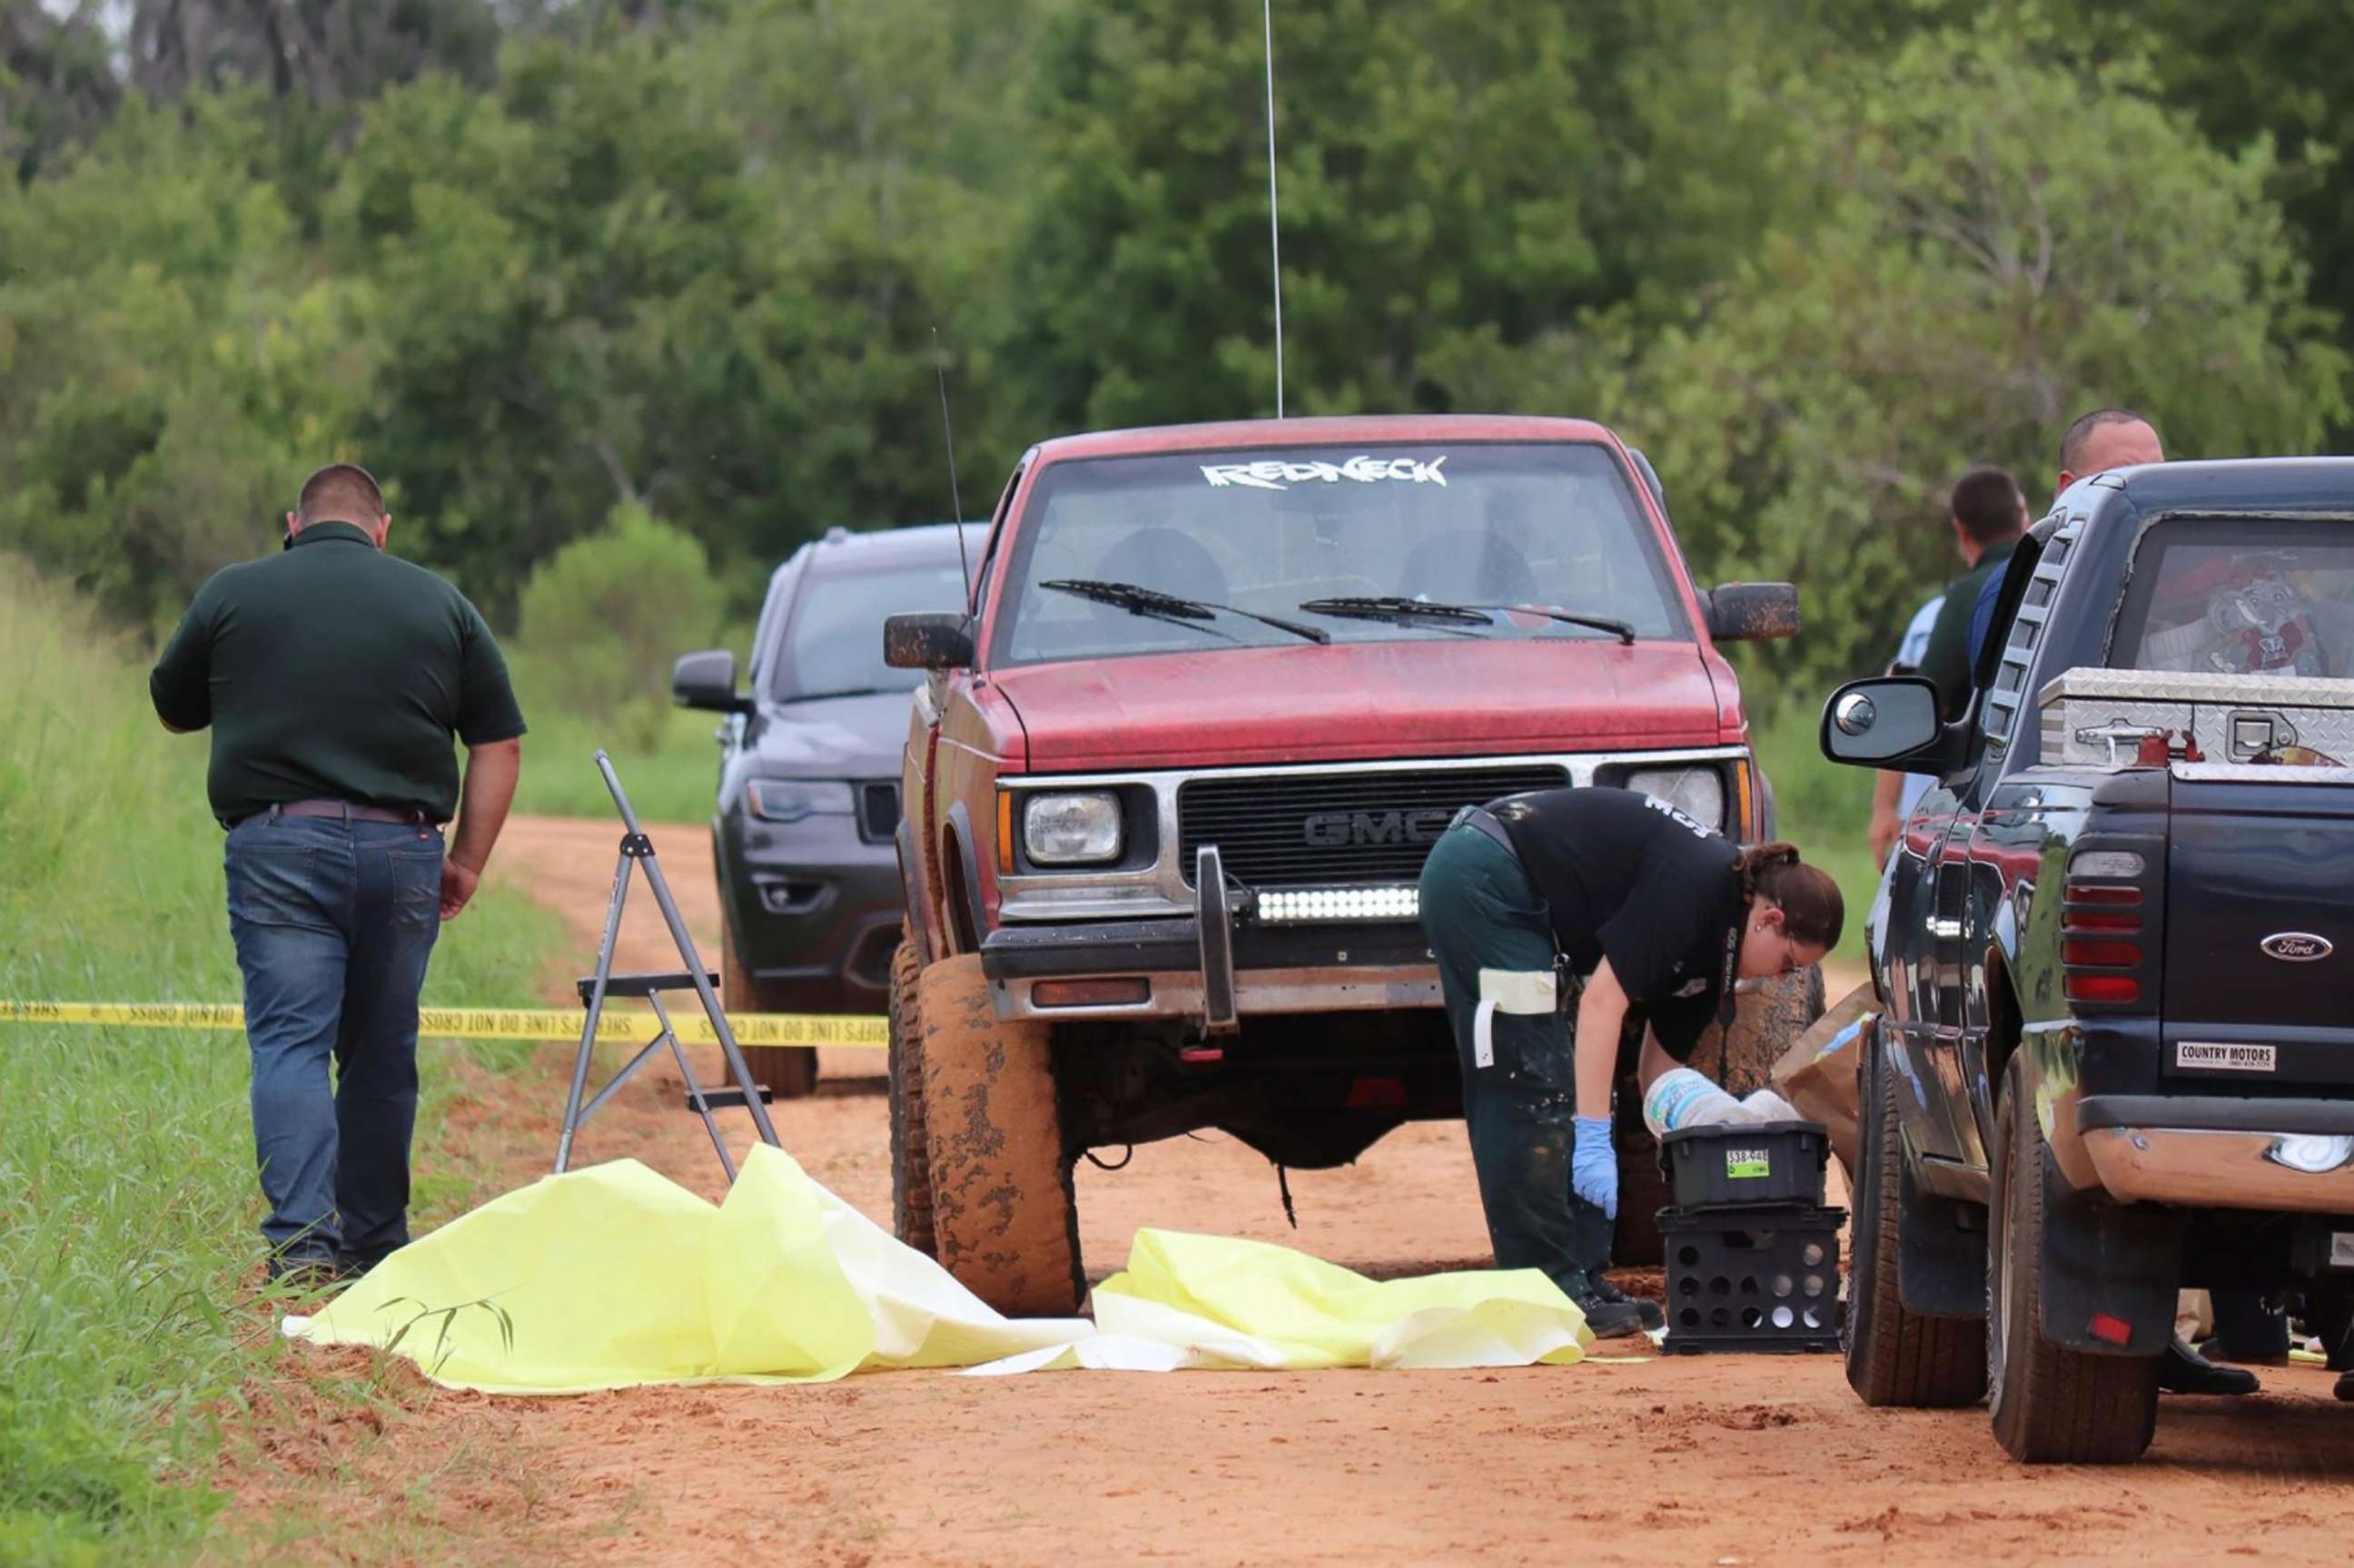 PHOTO: Officials investigate the scene on July 18, 2020, where three people were killed while fishing in Frostproof, Fla., the previous day.